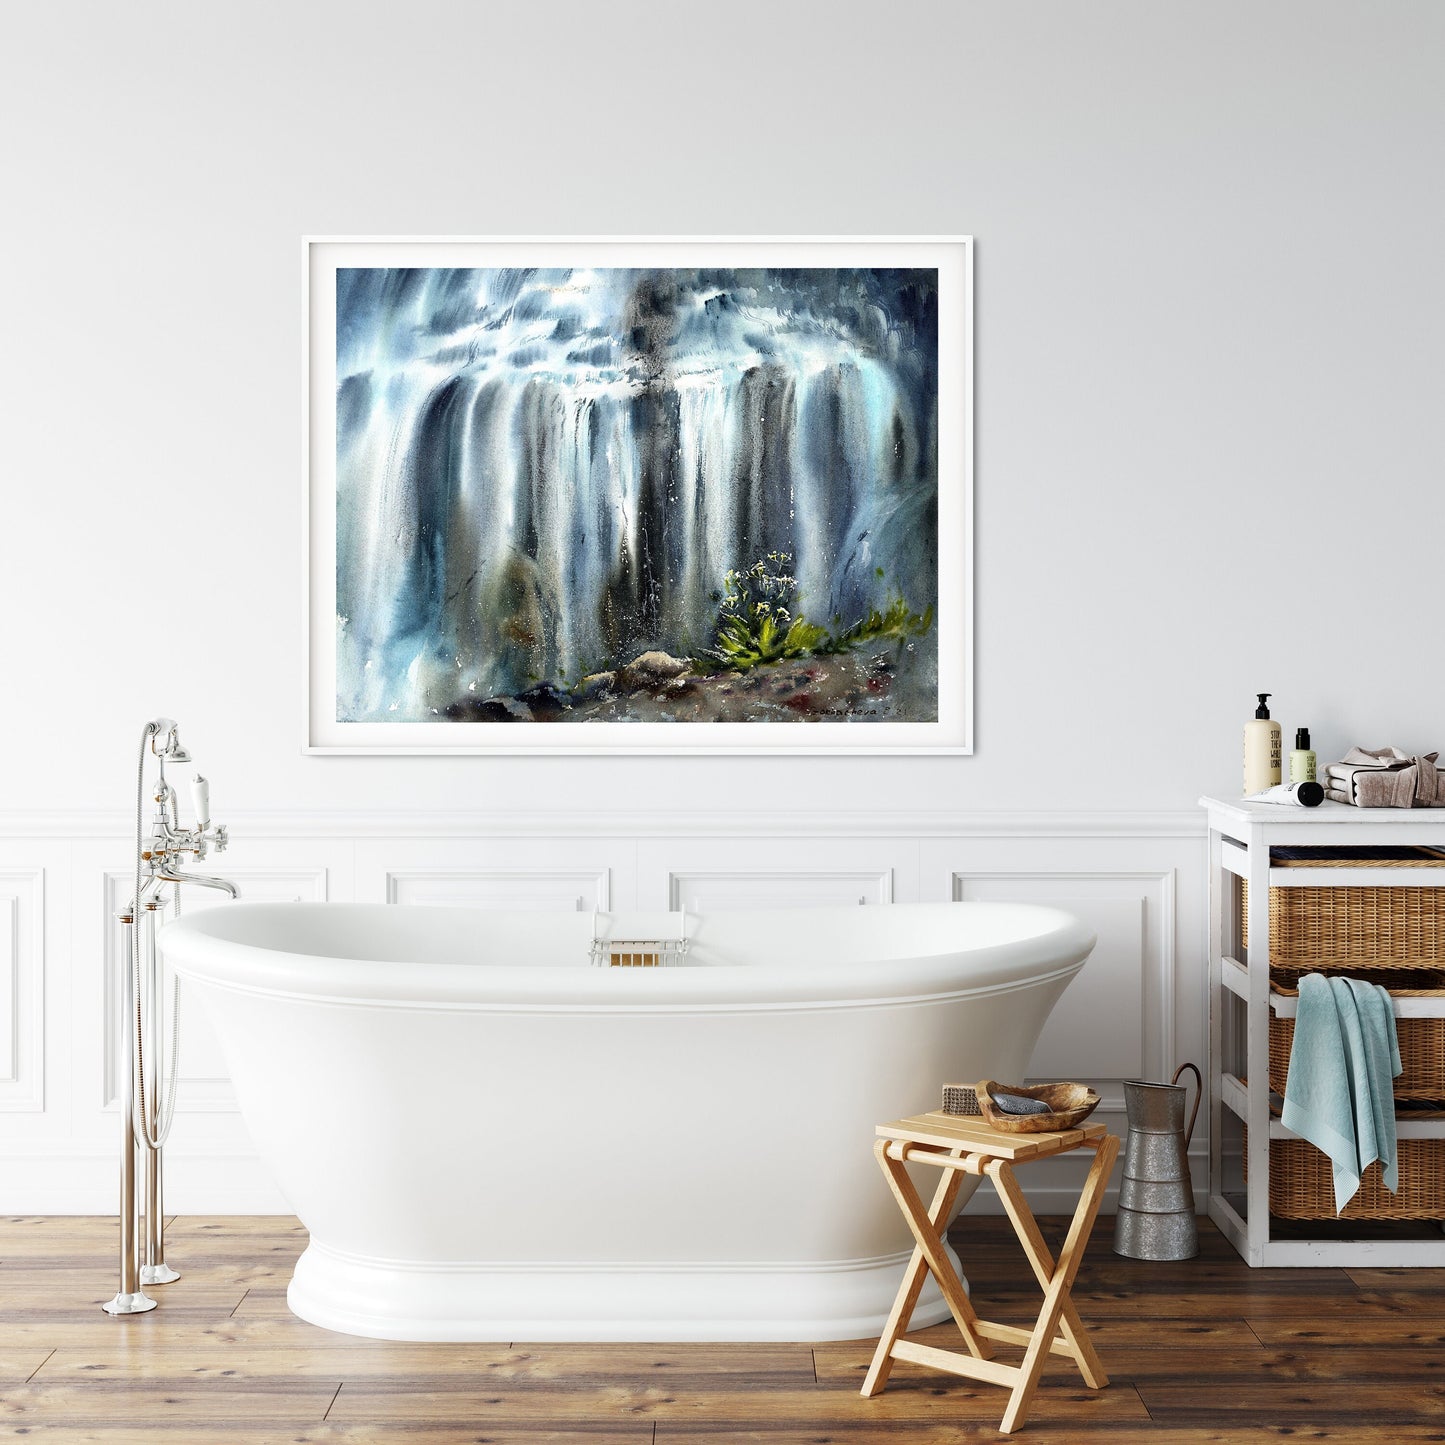 Tropic Waterfall Art Print, Beautiful Nature Landscape Canvas Wall Art Design, Decor for Home & Office Decoration